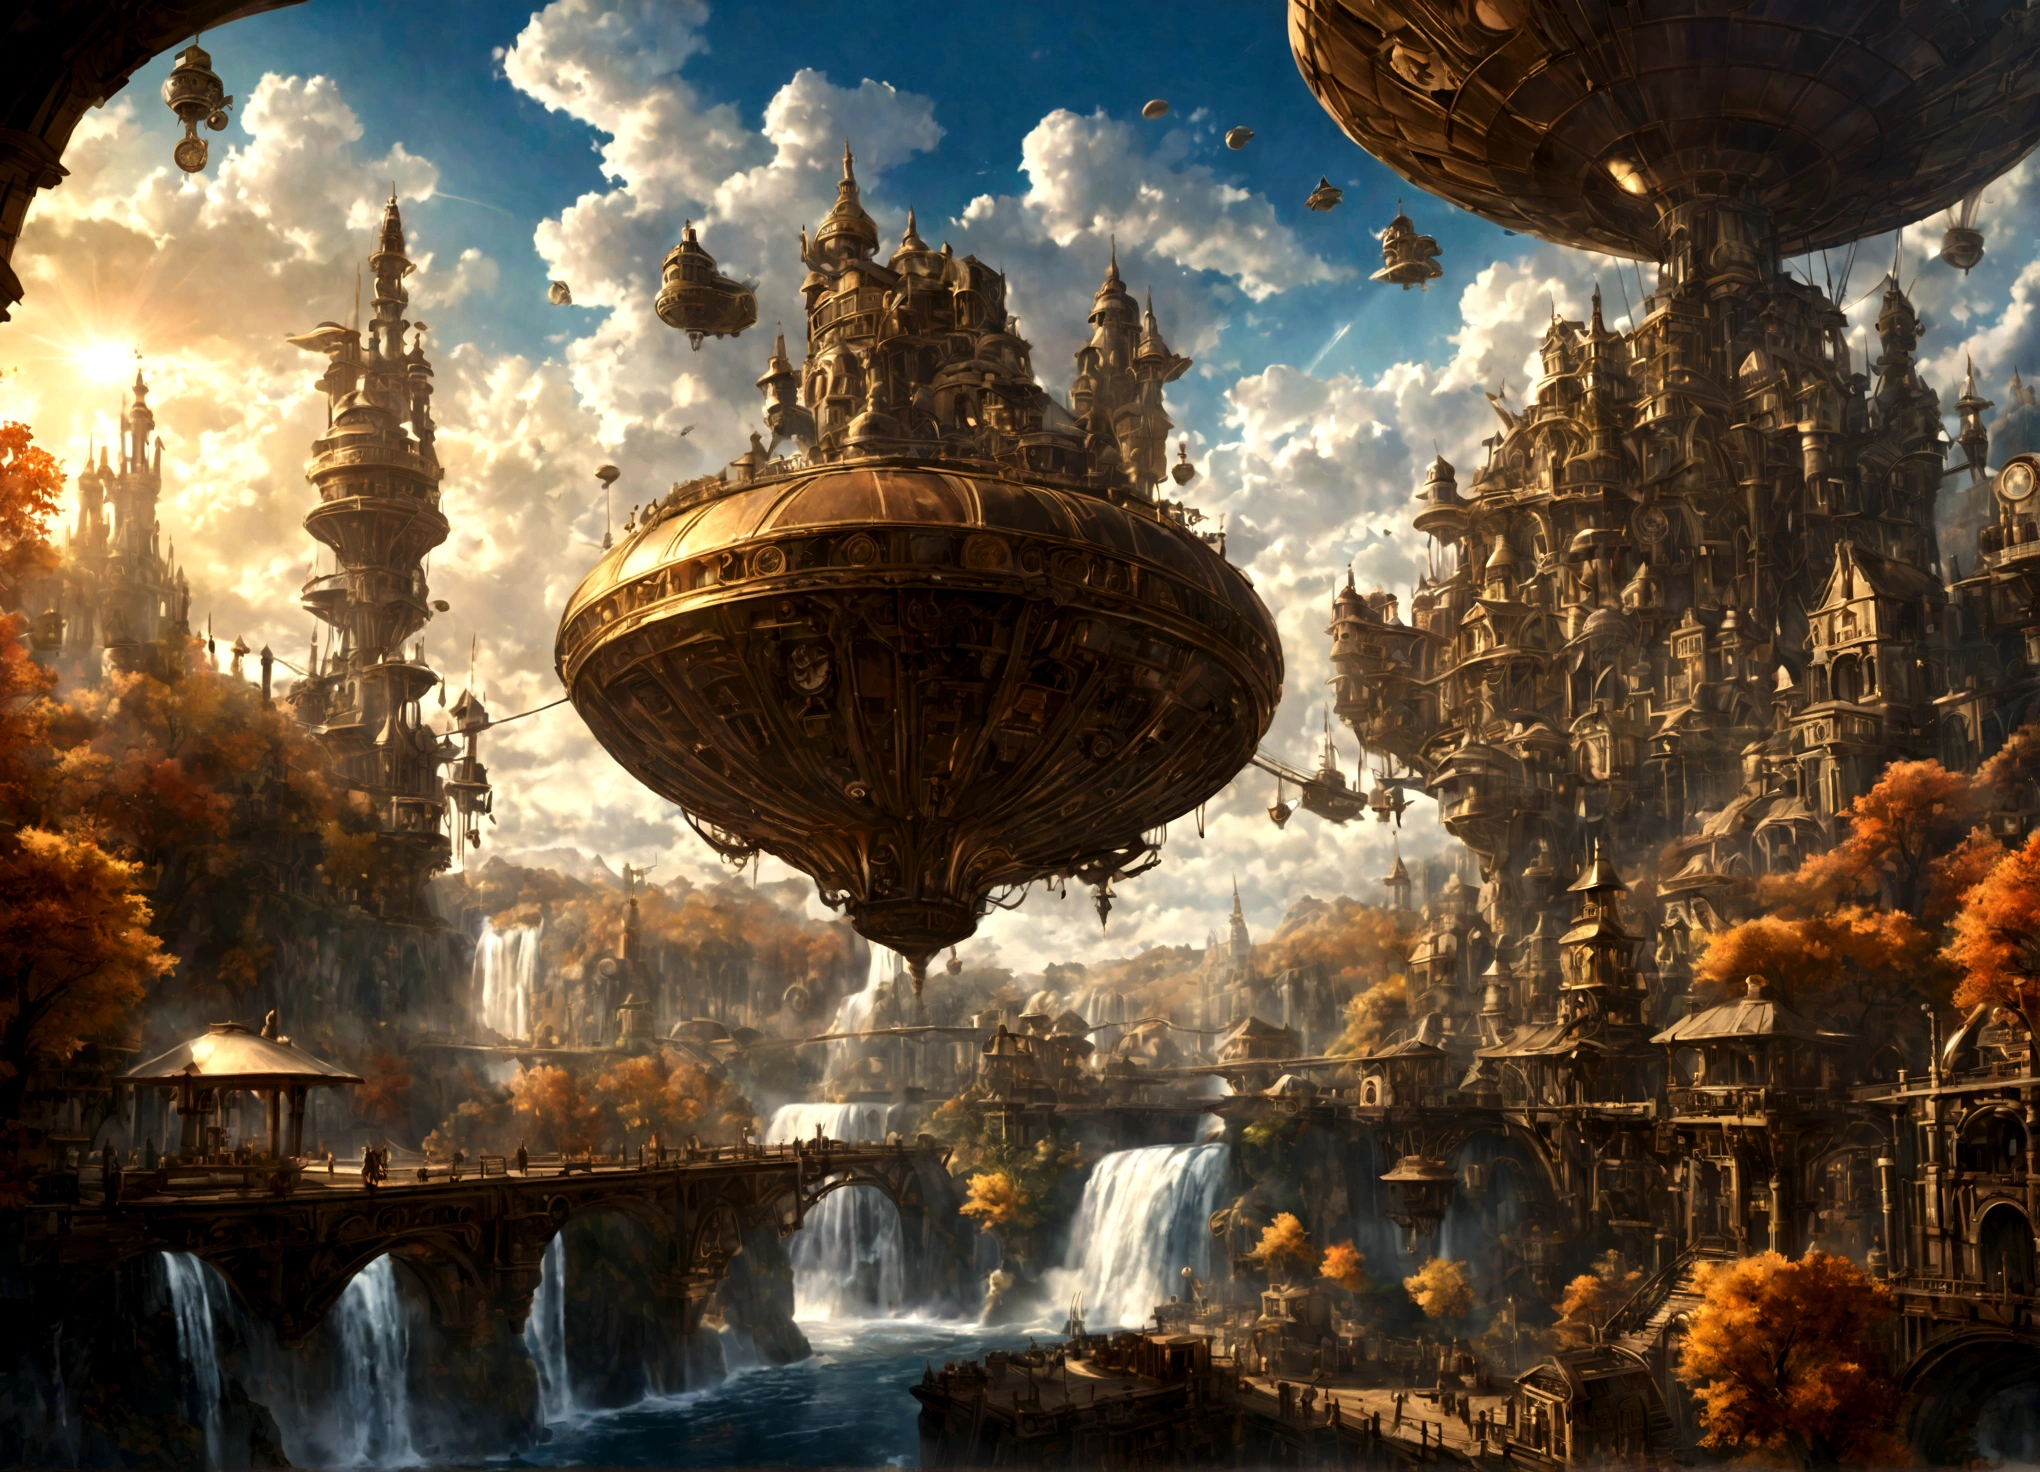 a beautiful steampunk clockwork city, small airships, floating islands, waterfalls, autumn themed forest, detailed architecture, advanced machinery, gears, brass, copper, beautiful sky, sunlight, lens flare, dramatic lighting, intricate details, photorealistic, highly detailed, cinematic, concept art style